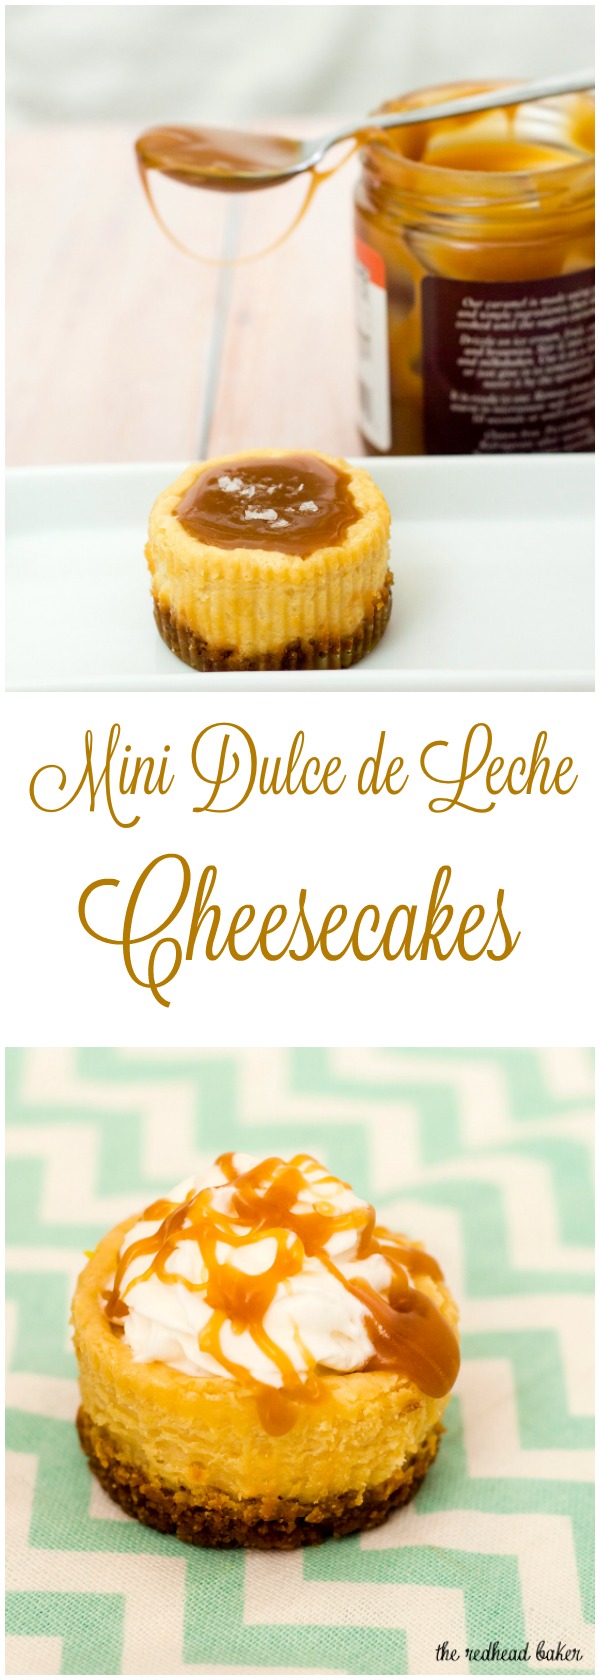 Finish off a tapas-style meal with mini dulce de leche cheesecakes — individual-sized creamy caramel-flavored cheesecakes with a cinnamon-crumb crust. #SundaySupper TheRedheadBaker.com